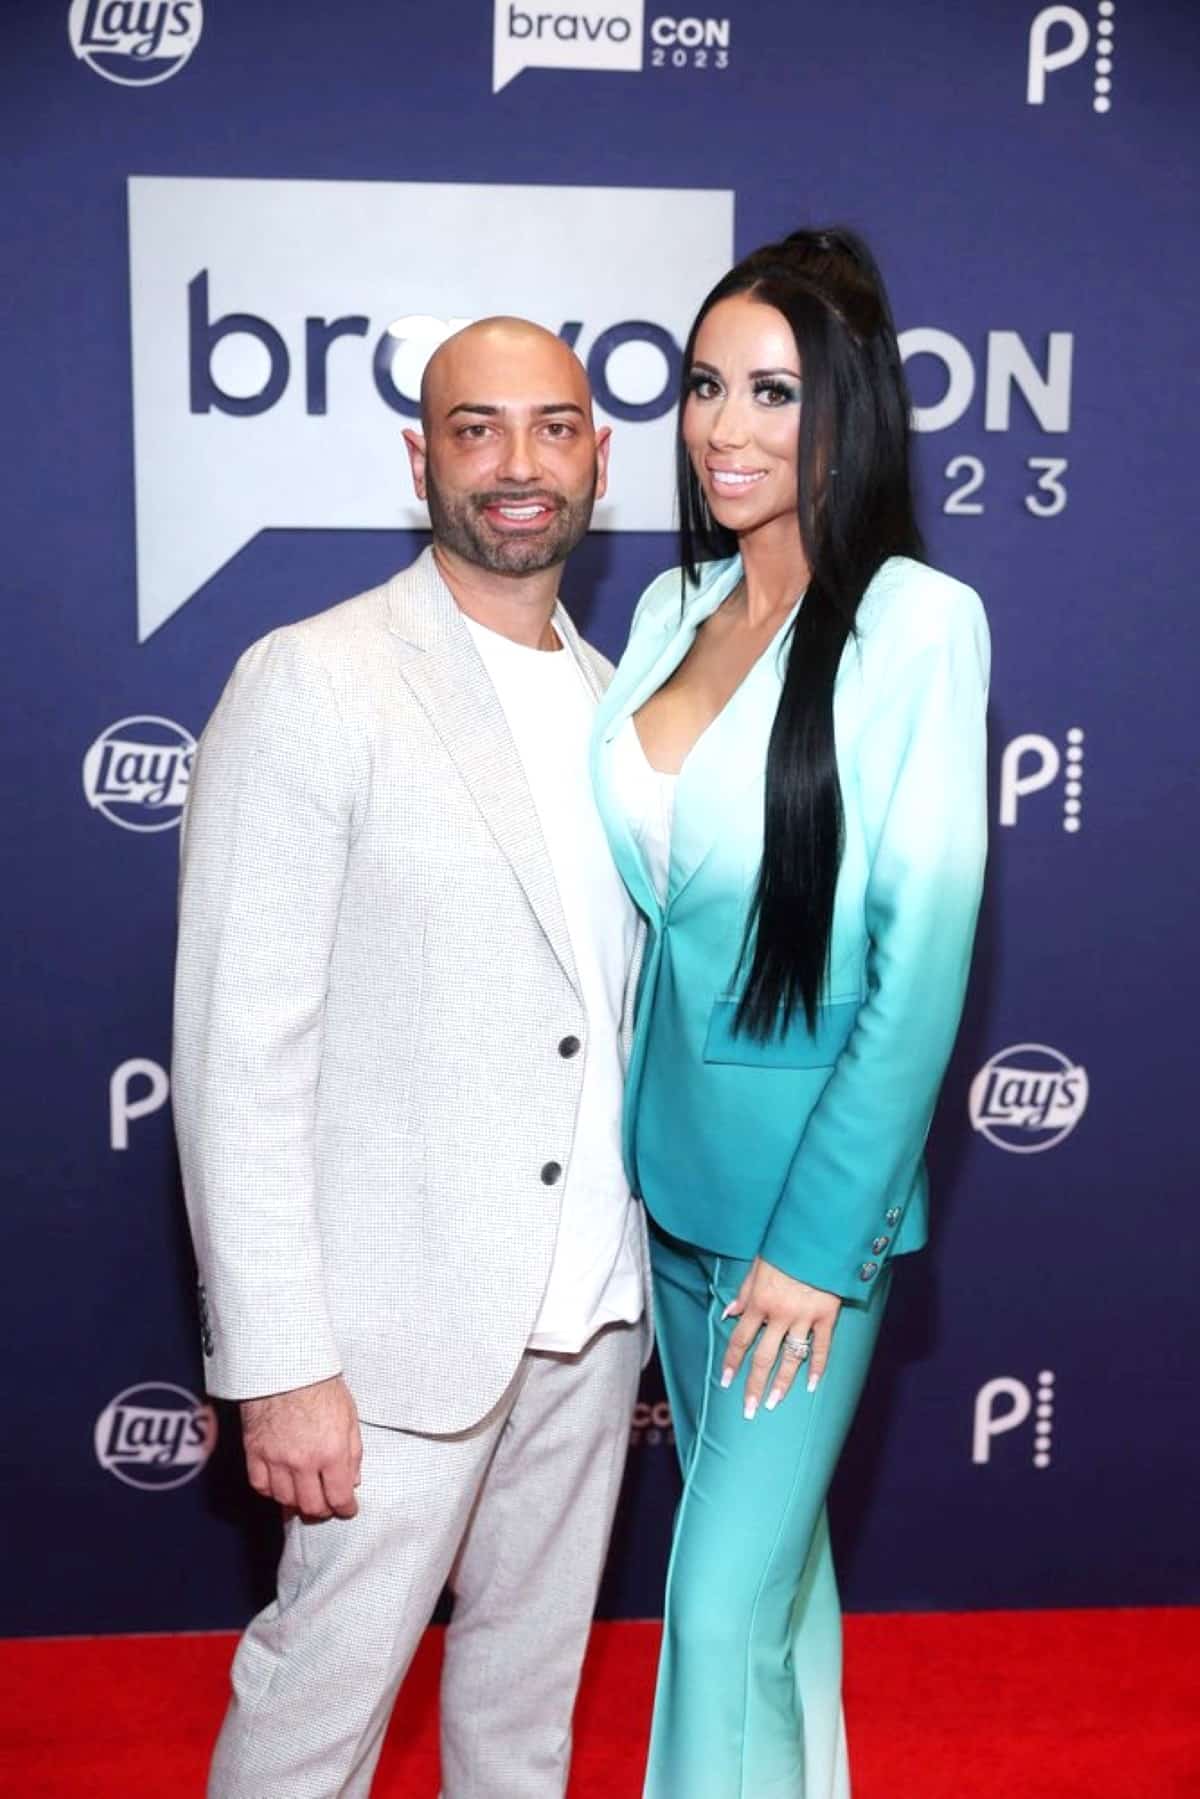 John Fuda Says Joining RHONJ Was “Not Worth It,” Claims He Gets “Weird” Looks in Meetings, and Son’s Friends Are Being Warned to "Stay Away”